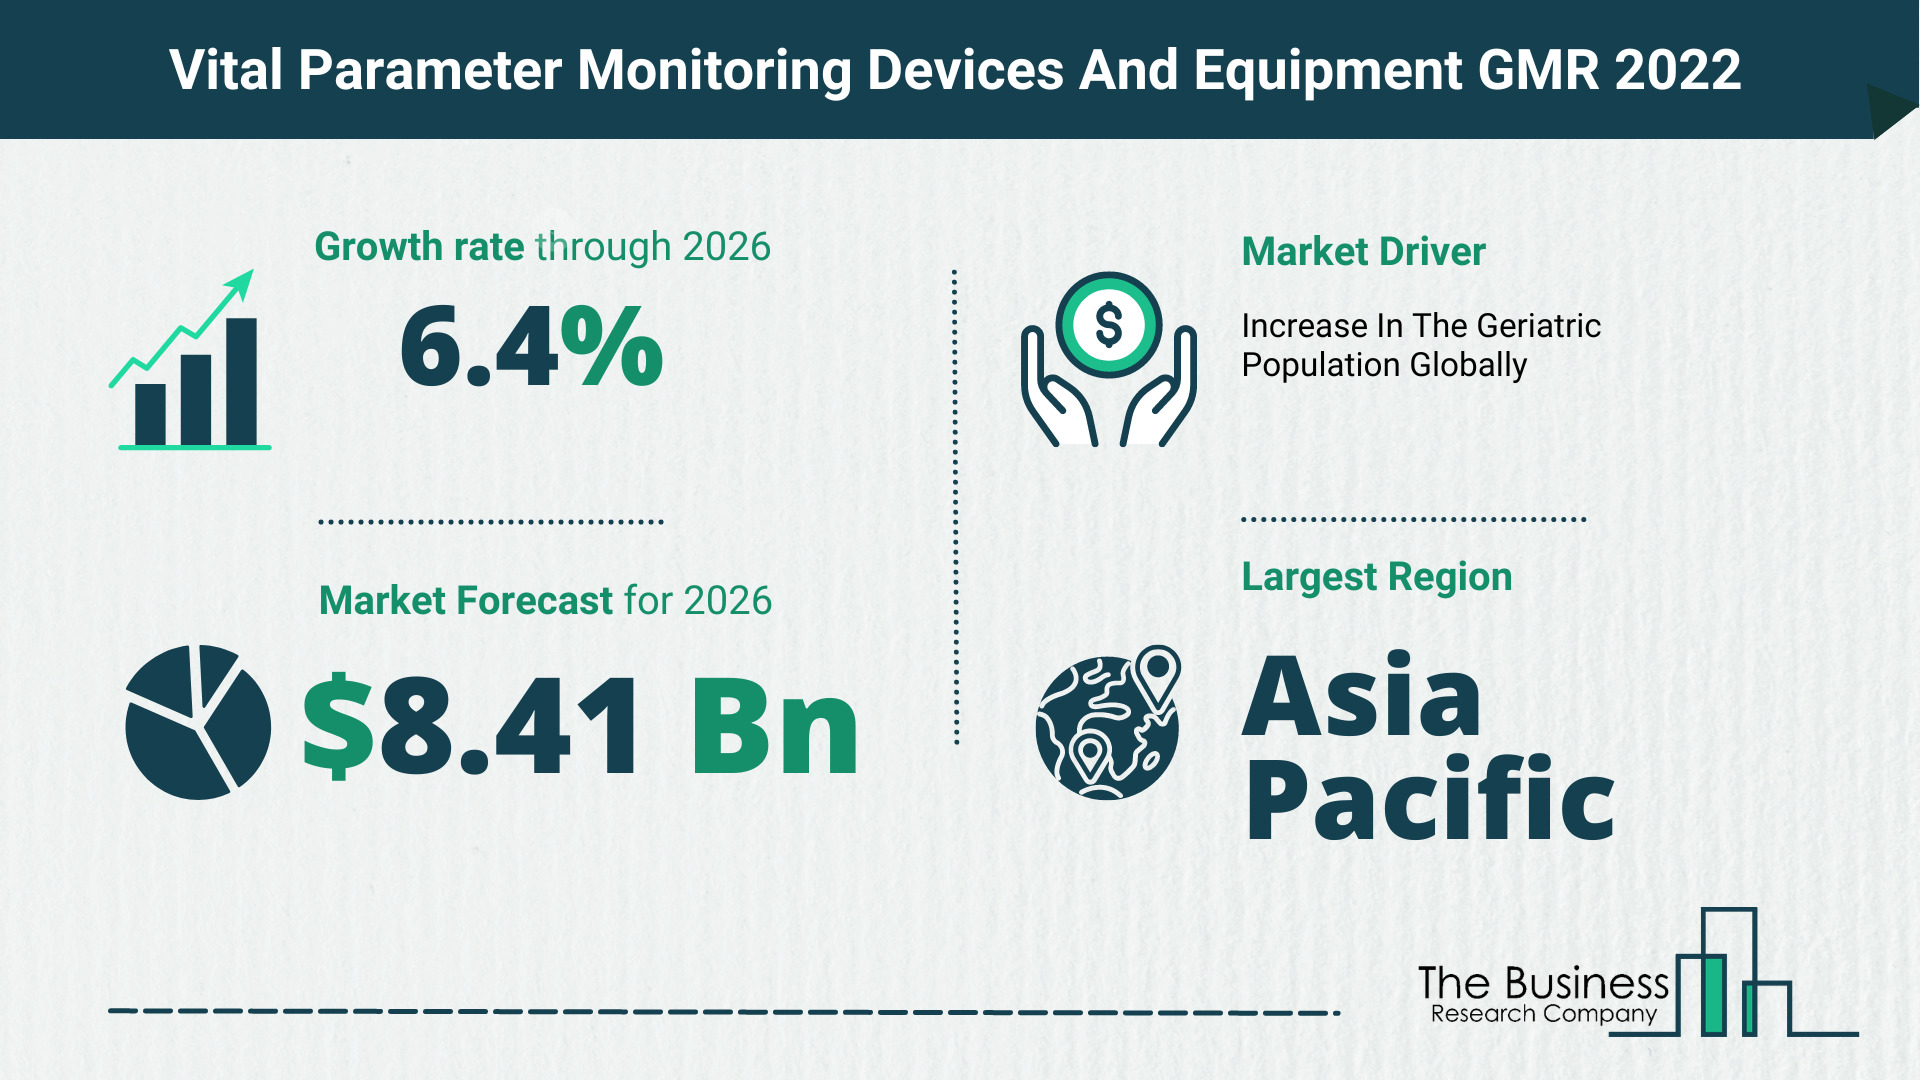 Latest Vital Parameter Monitoring Devices And Equipment Market Growth Study 2022-2026 By The Business Research Company